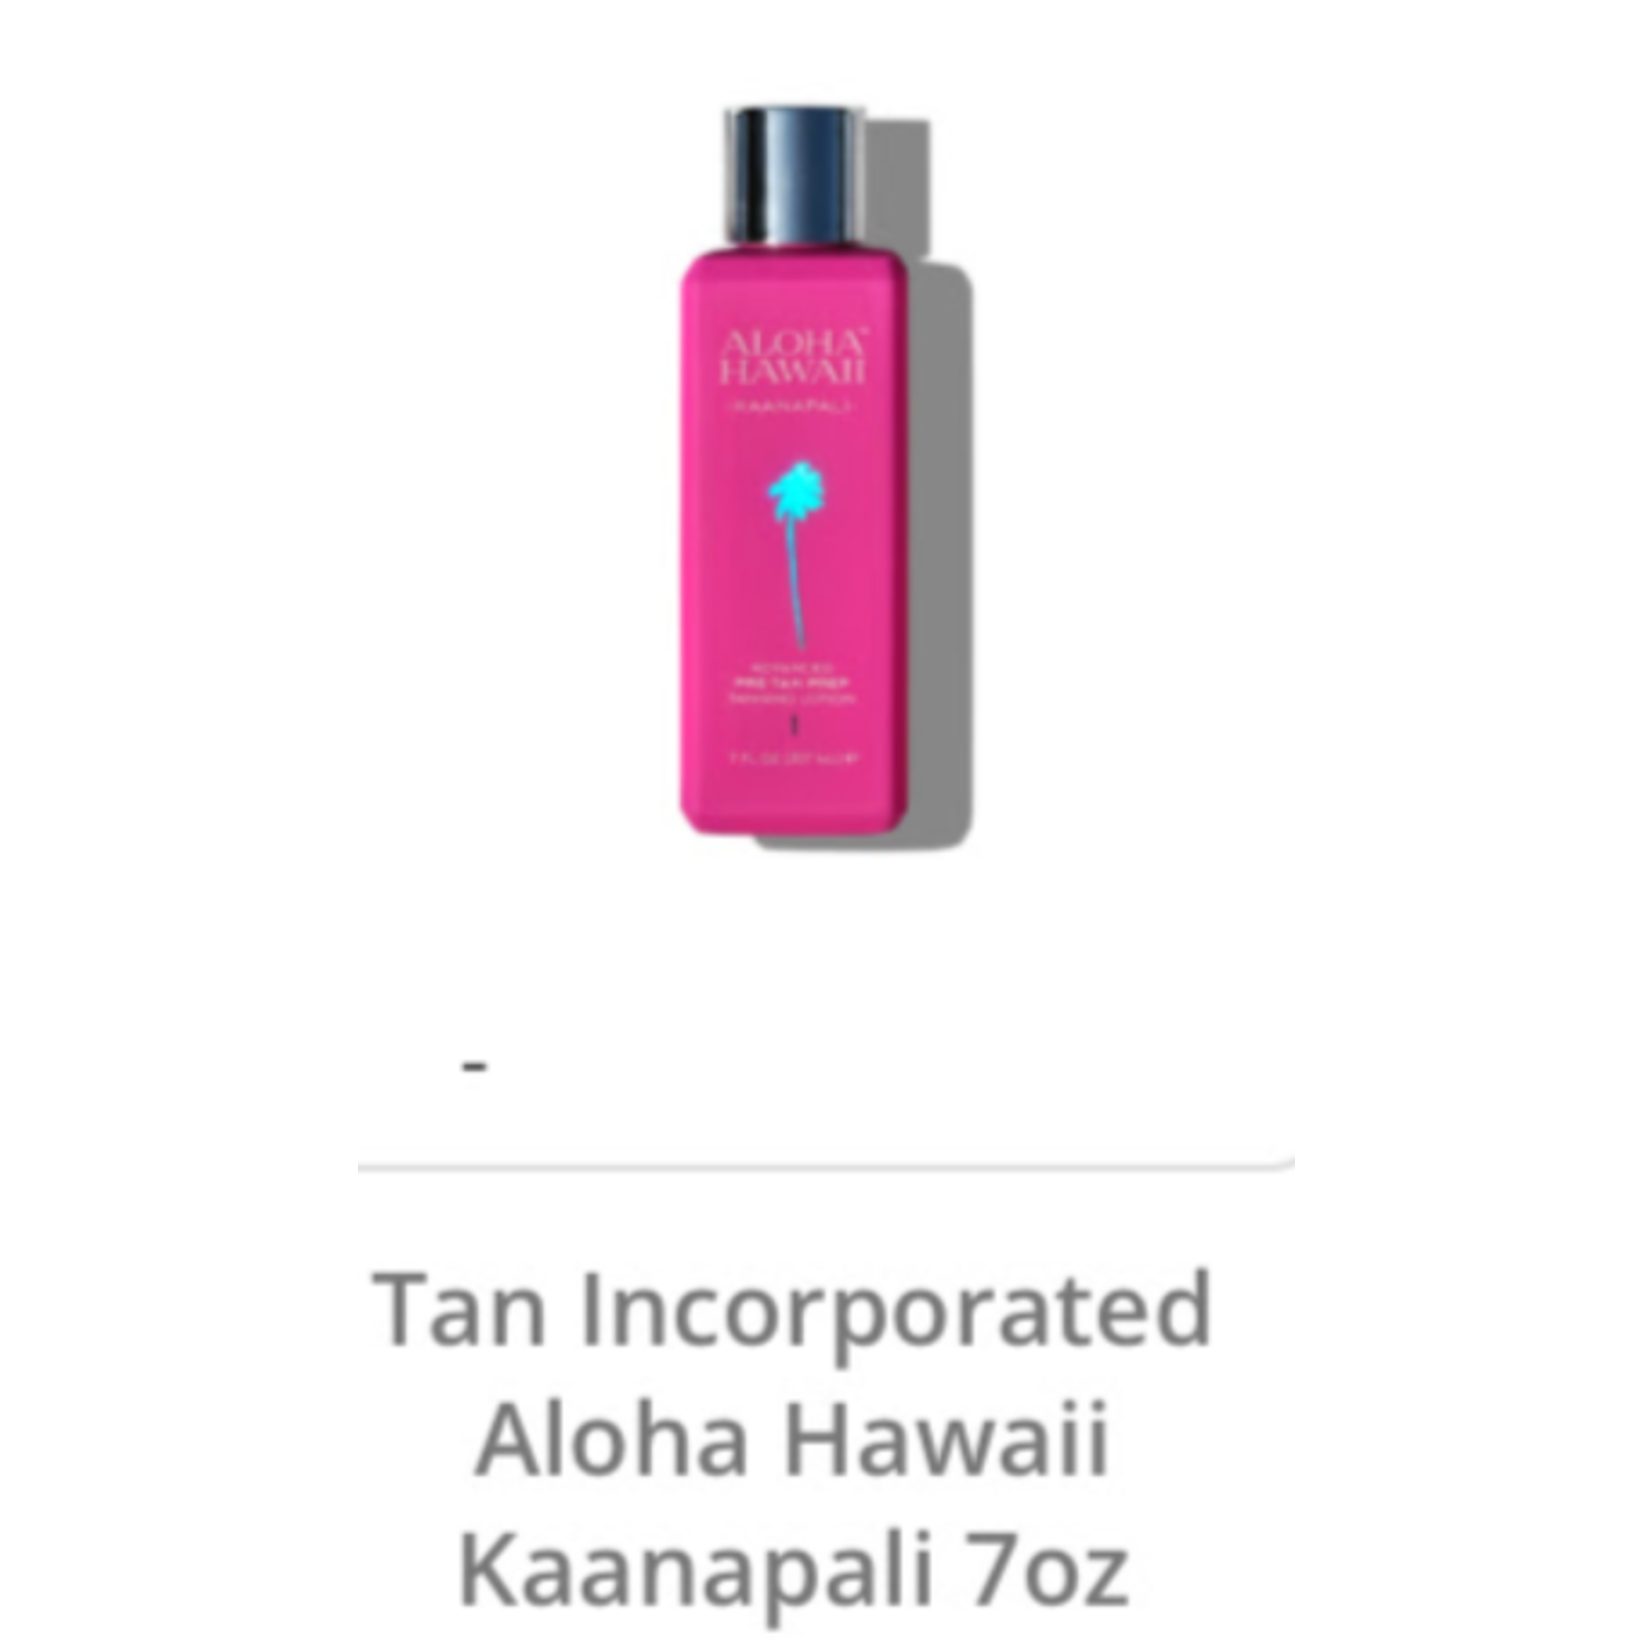 TAN INCORPORATED ALOHA HAWAII BOX 3 STEP TOTAL TANNING SYSTEM